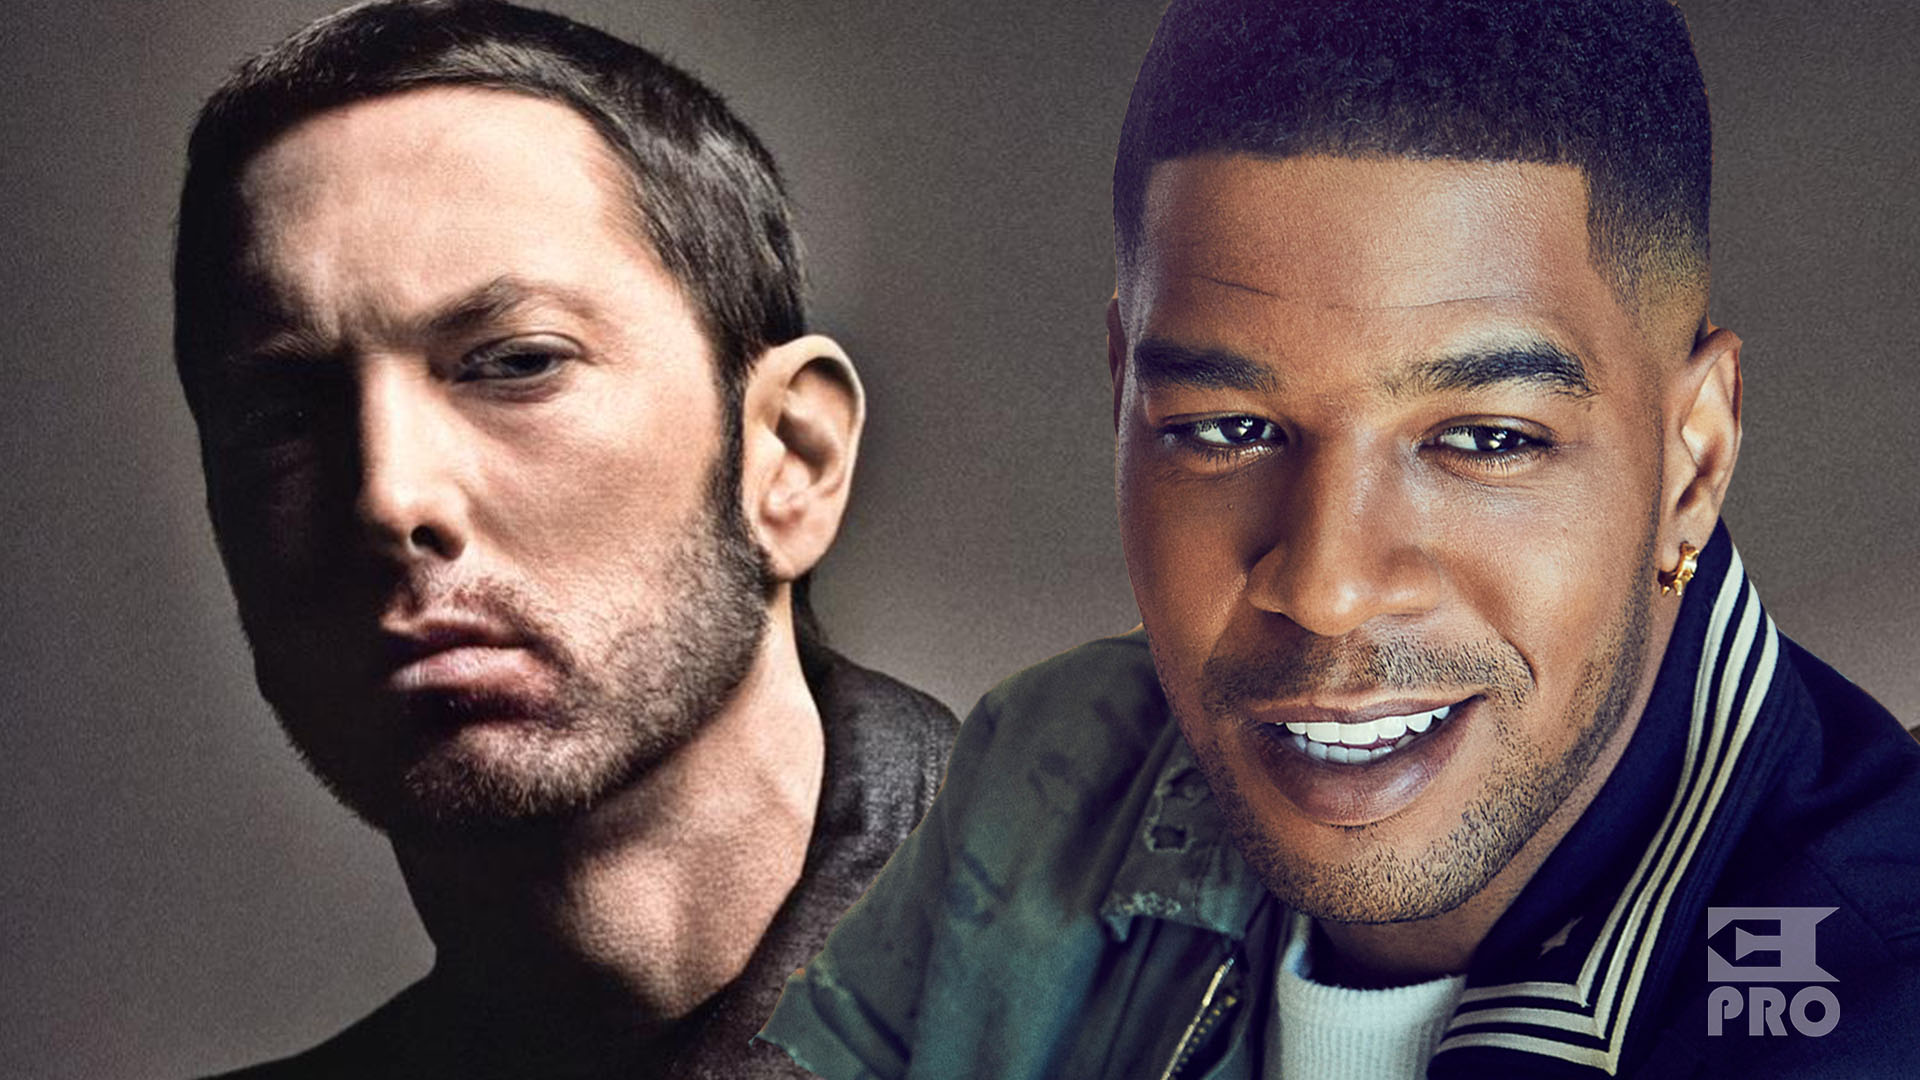 🚨NBA REMIX IS BACK 🚨 We collabed with @KidCudi, @Eminem